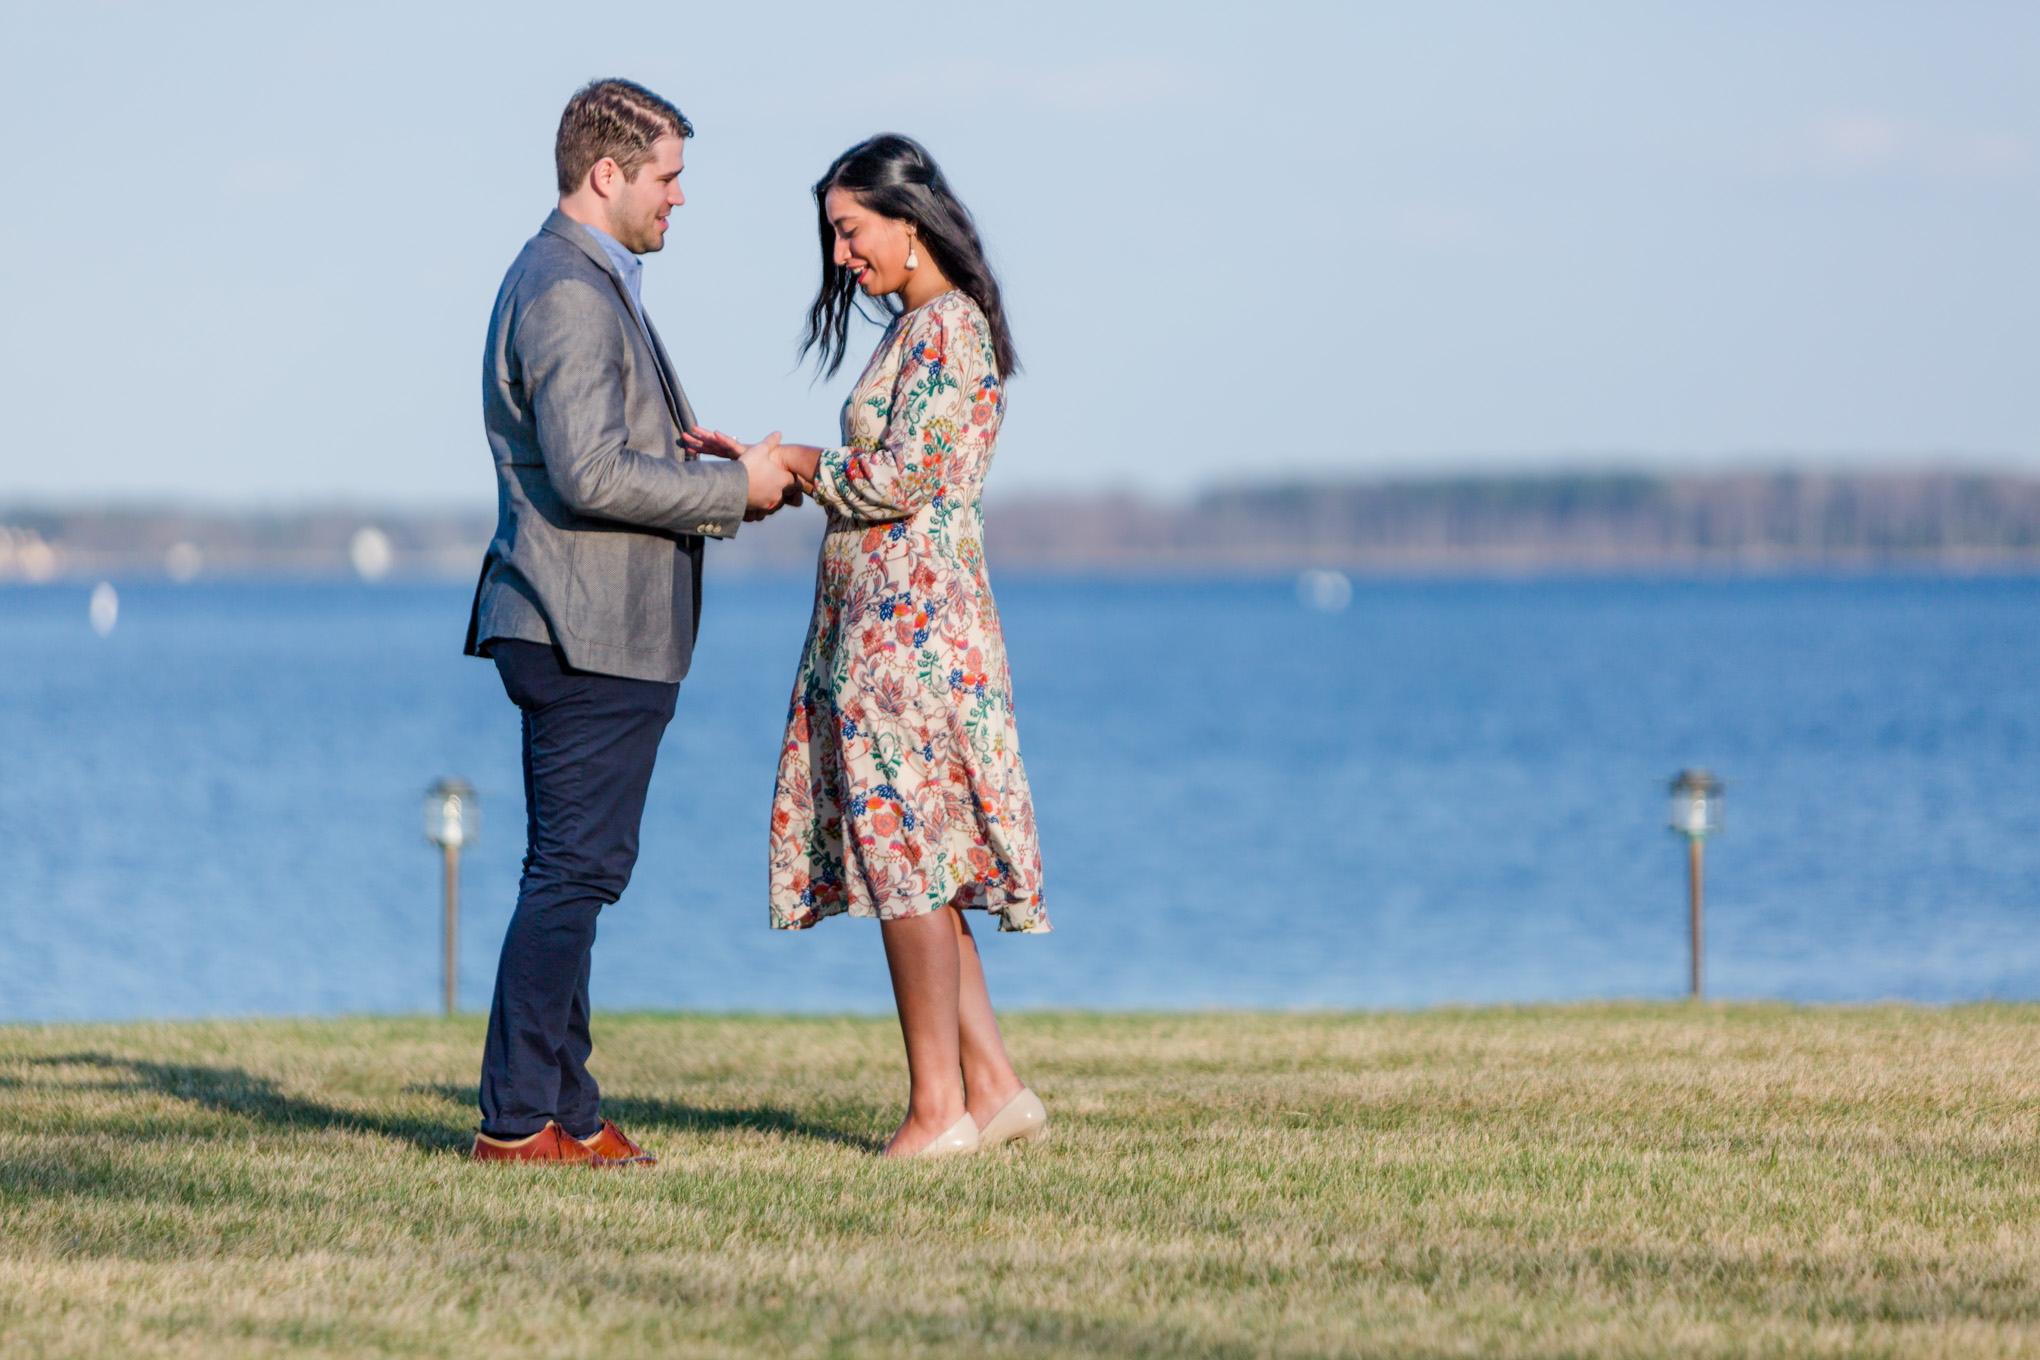 Inn at Perry Cabin, waterfront proposal, surprise proposal, marriage proposal, Maryland waterfront, Maryland eastern shore, spring marriage proposal, floral dress, grey blazer, St. Michaels, engagement, engaged couple, St. Michaels surprise proposal